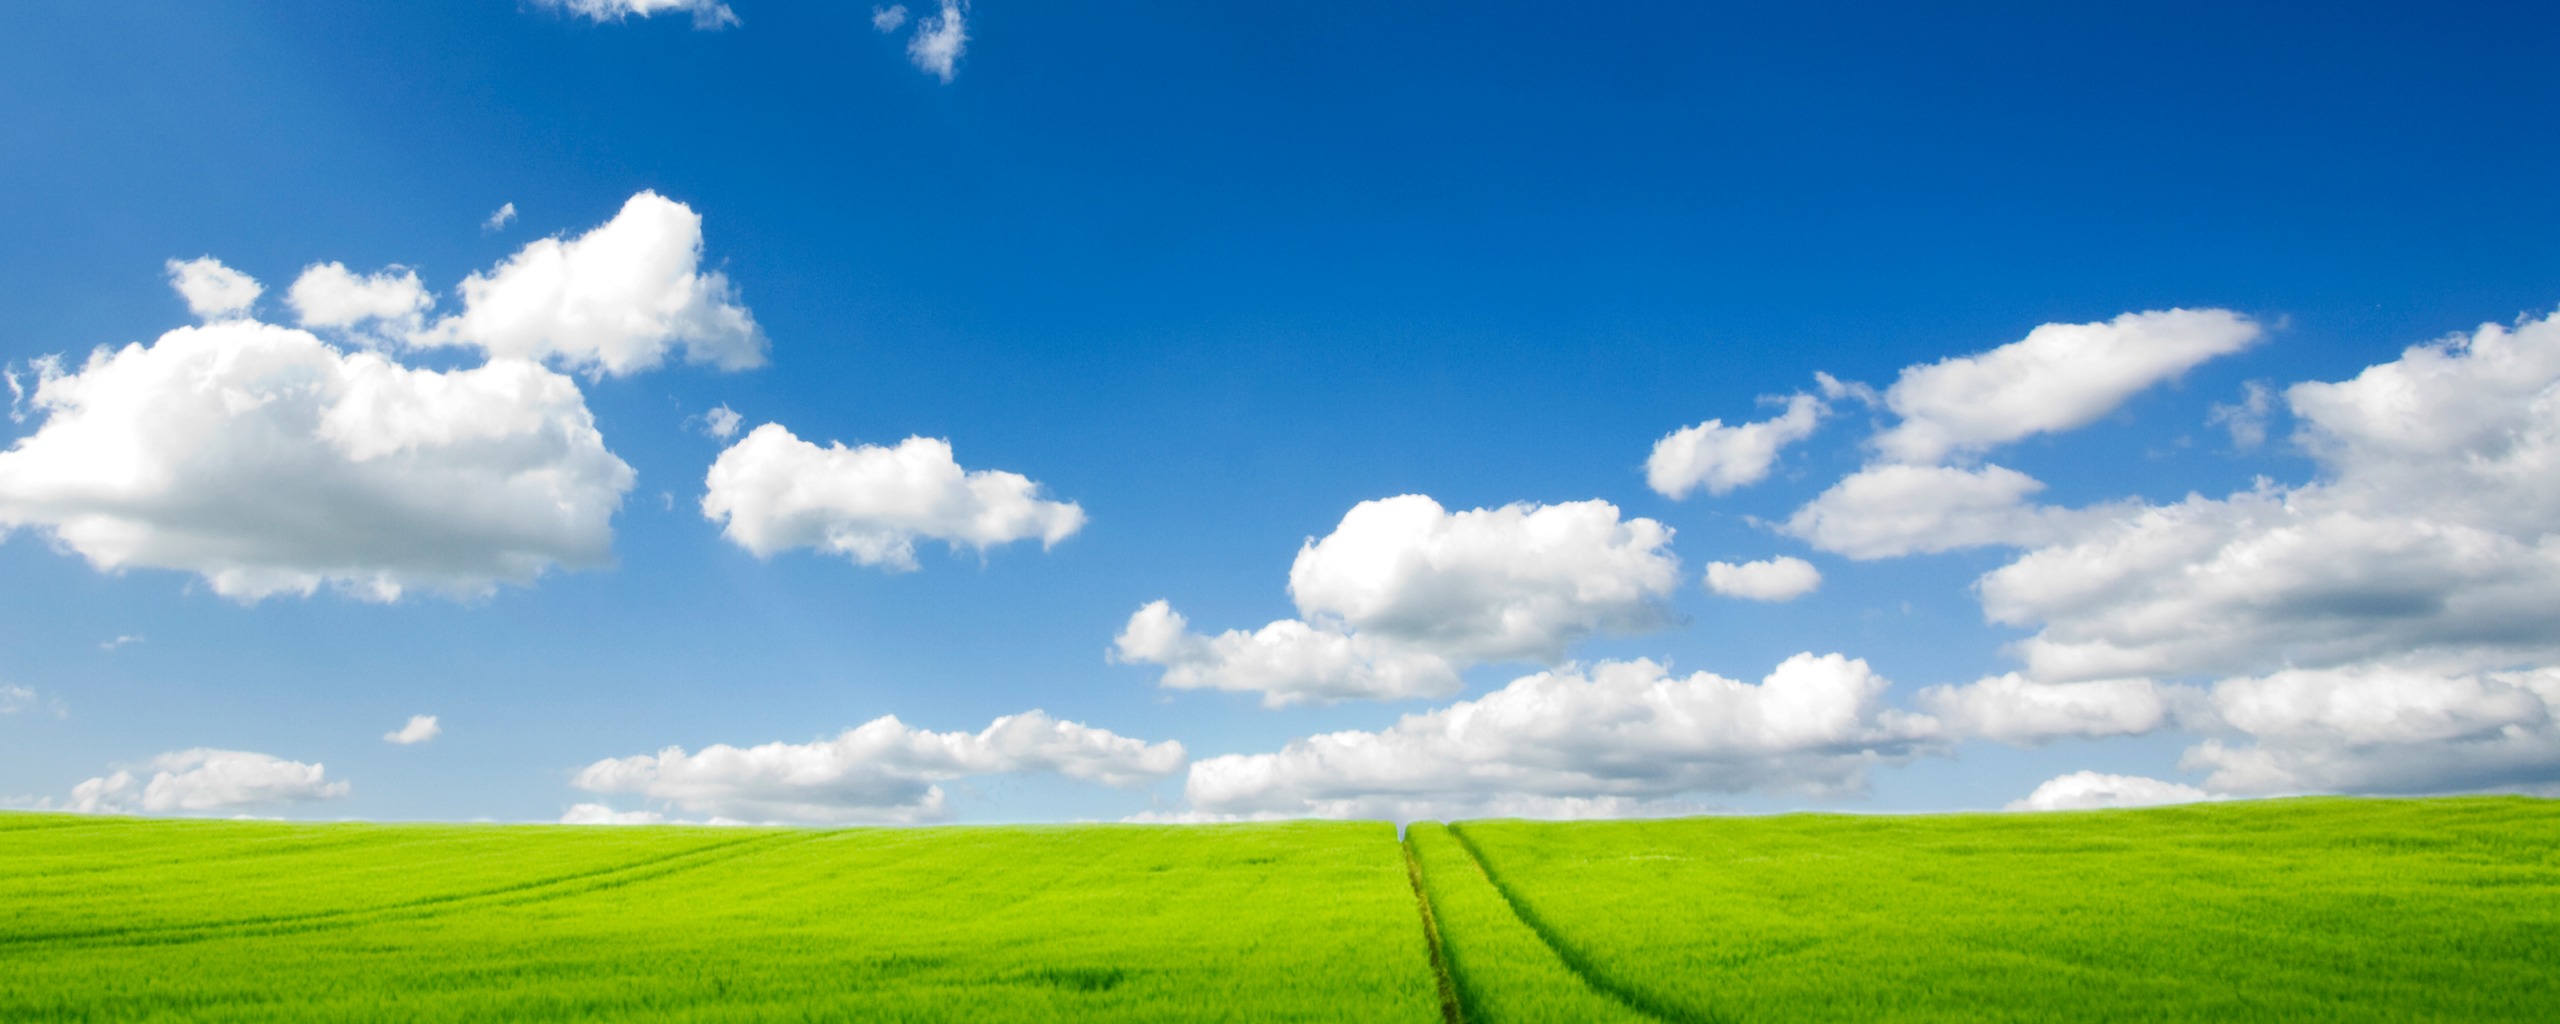 Wallpaper That Is Rather Like The Bliss For Windows Xp